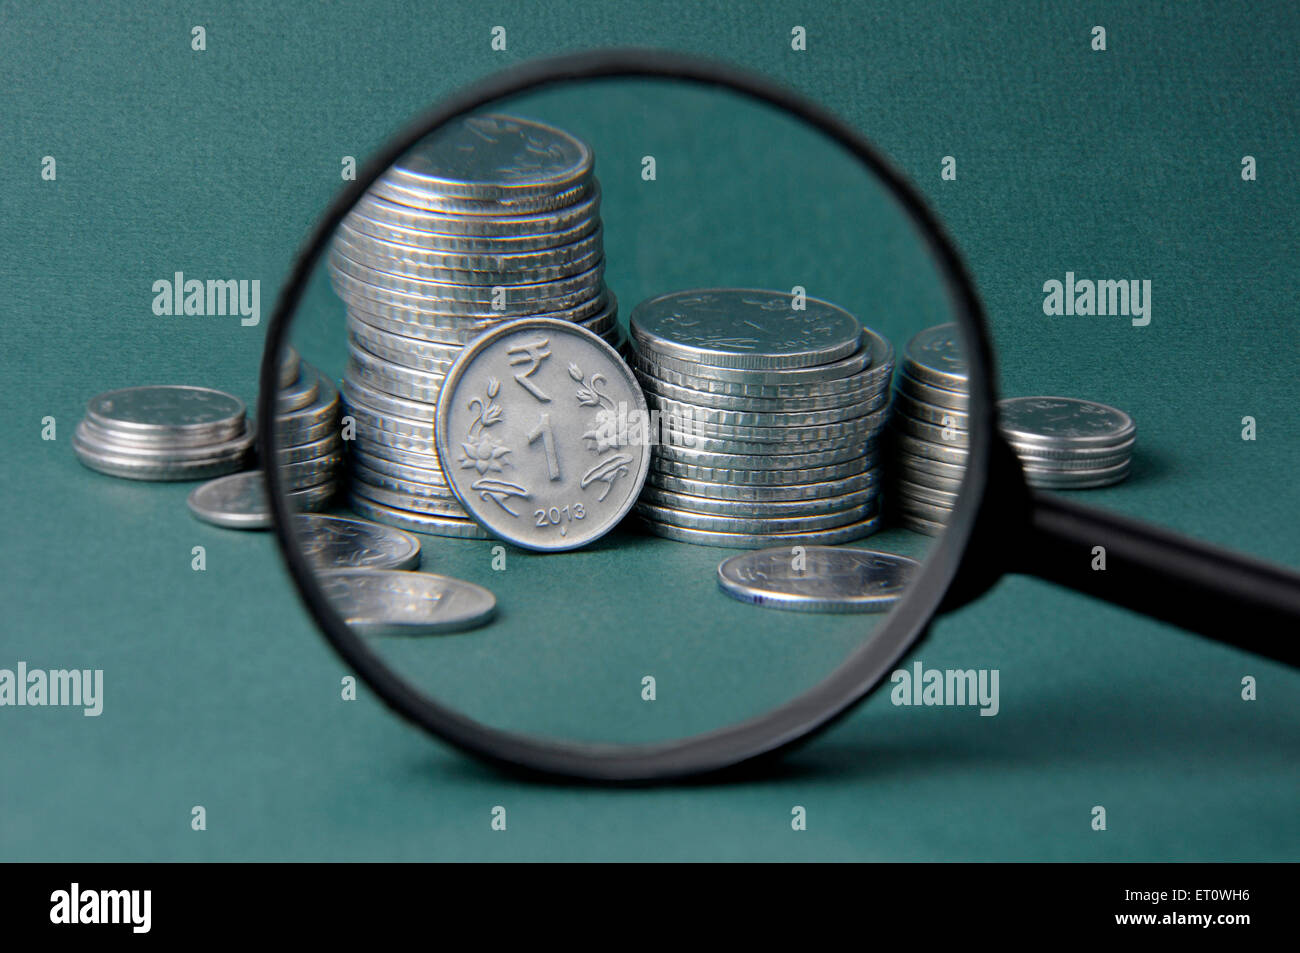 concept of Magnifier and coin Stock Photo